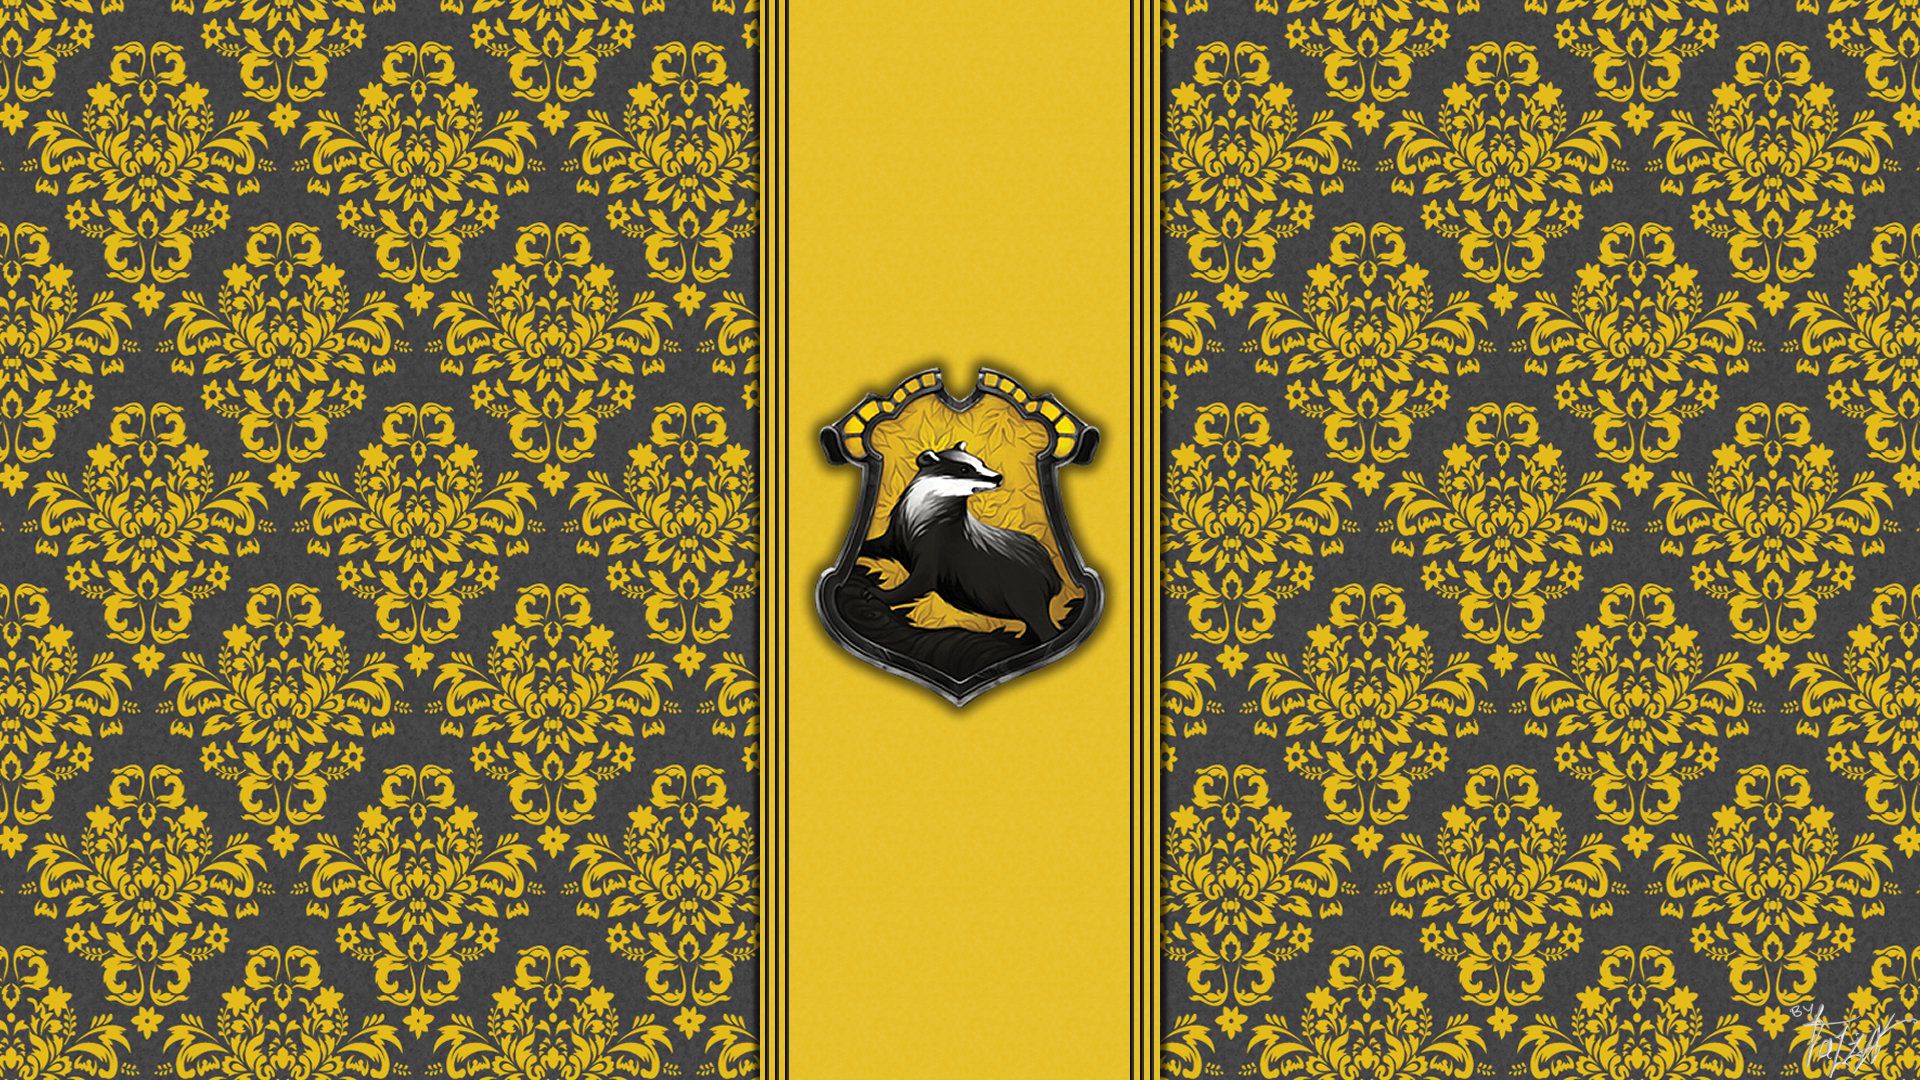 A yellow and black pattern with the crest of gryffindor - Hufflepuff